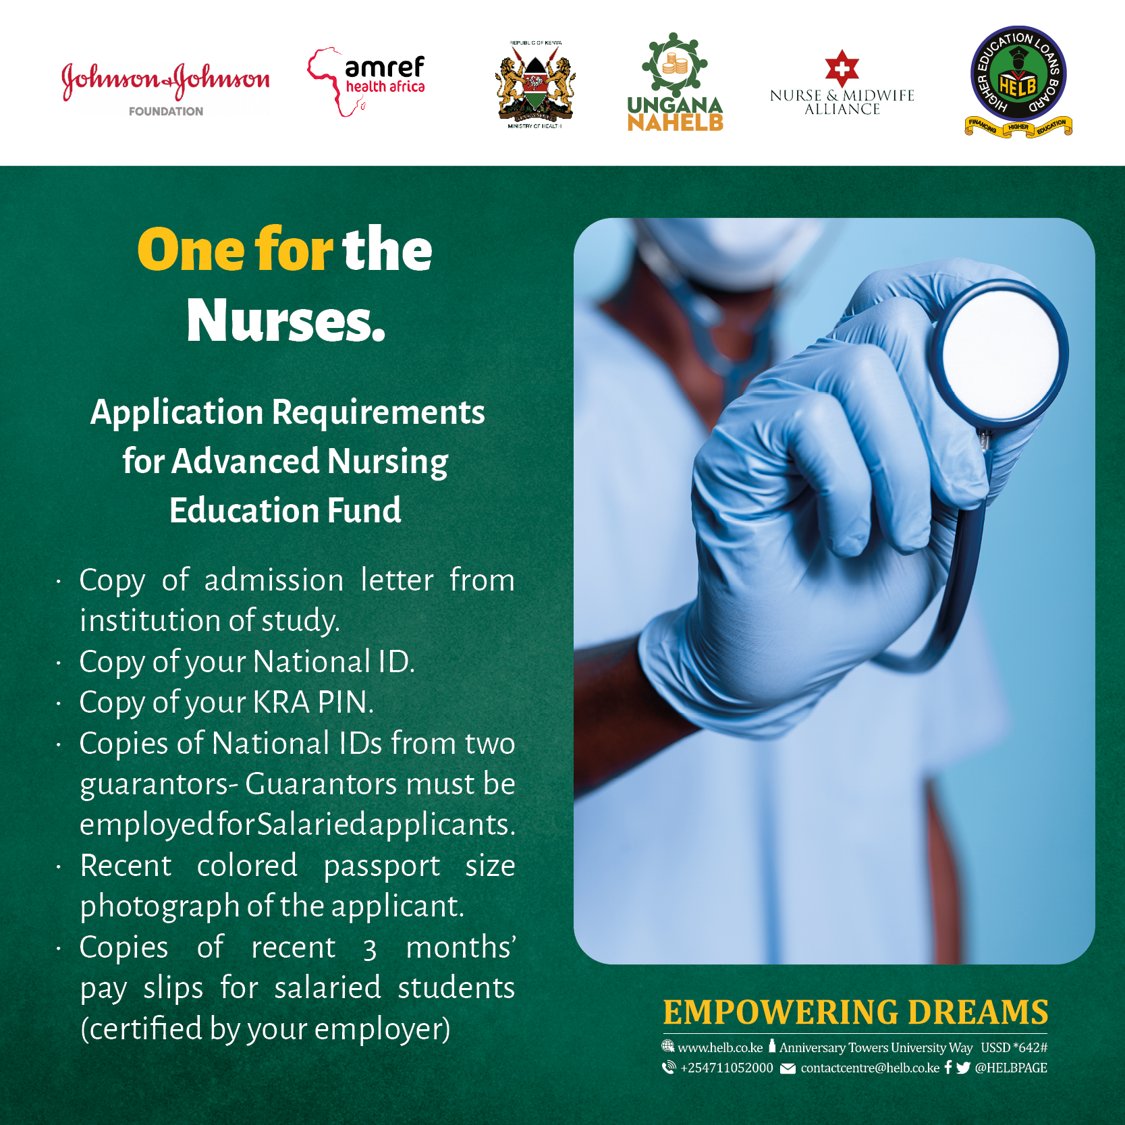 Are you a nurse looking to advance your education? Check out the Advanced Nursing Education Fund. Borrow up to 500K at just 4% yearly interest and repay over 5 years. #NursingEducationLoan #EmpoweringDreams